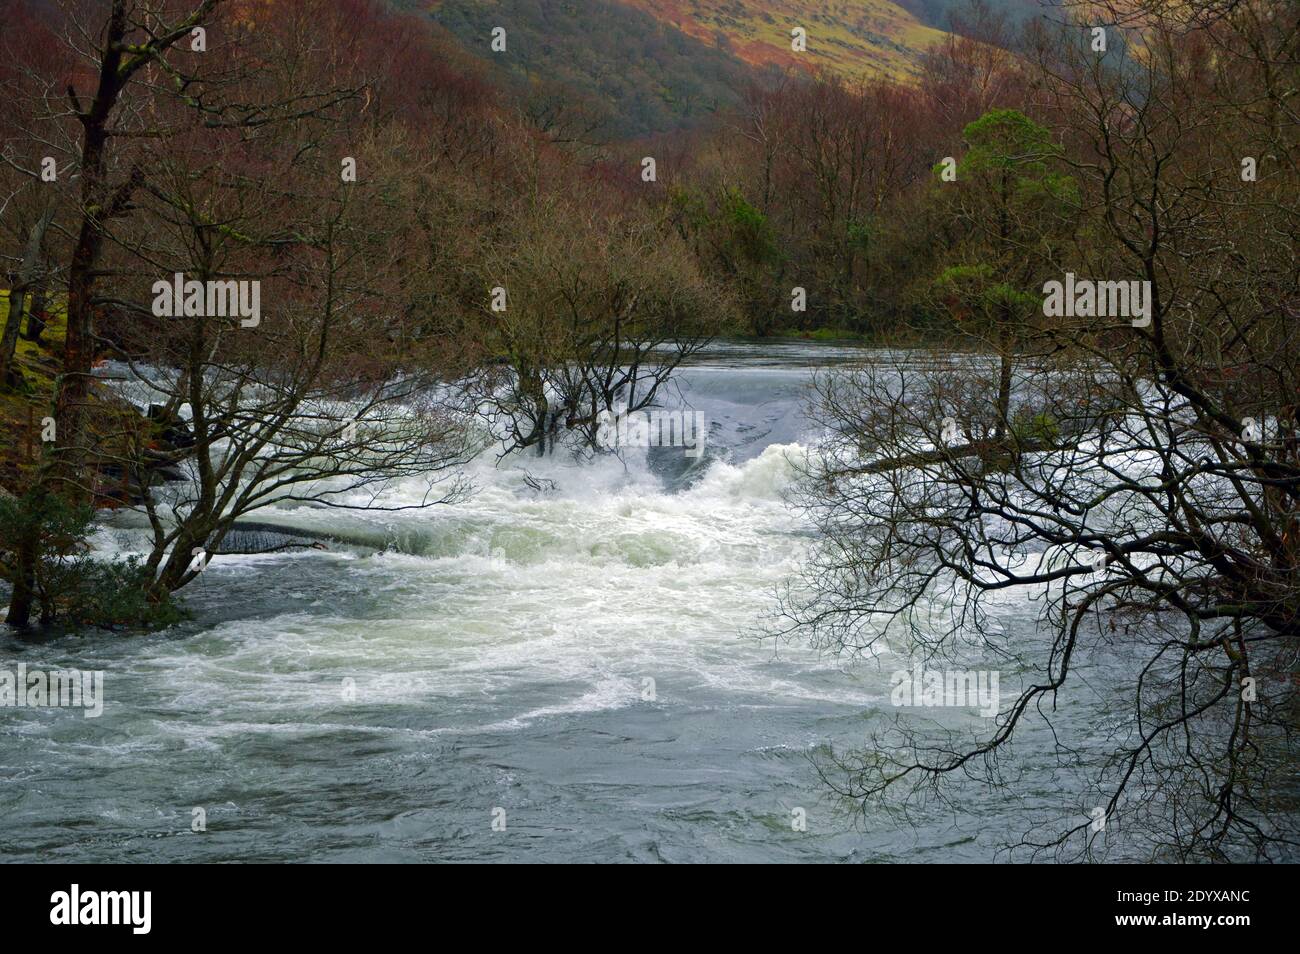 The Ogwen River has its main source in Lake Ogwen in Snowdonia but is seen here in spate as it passes through a wooded valley in its lower reaches. Stock Photo